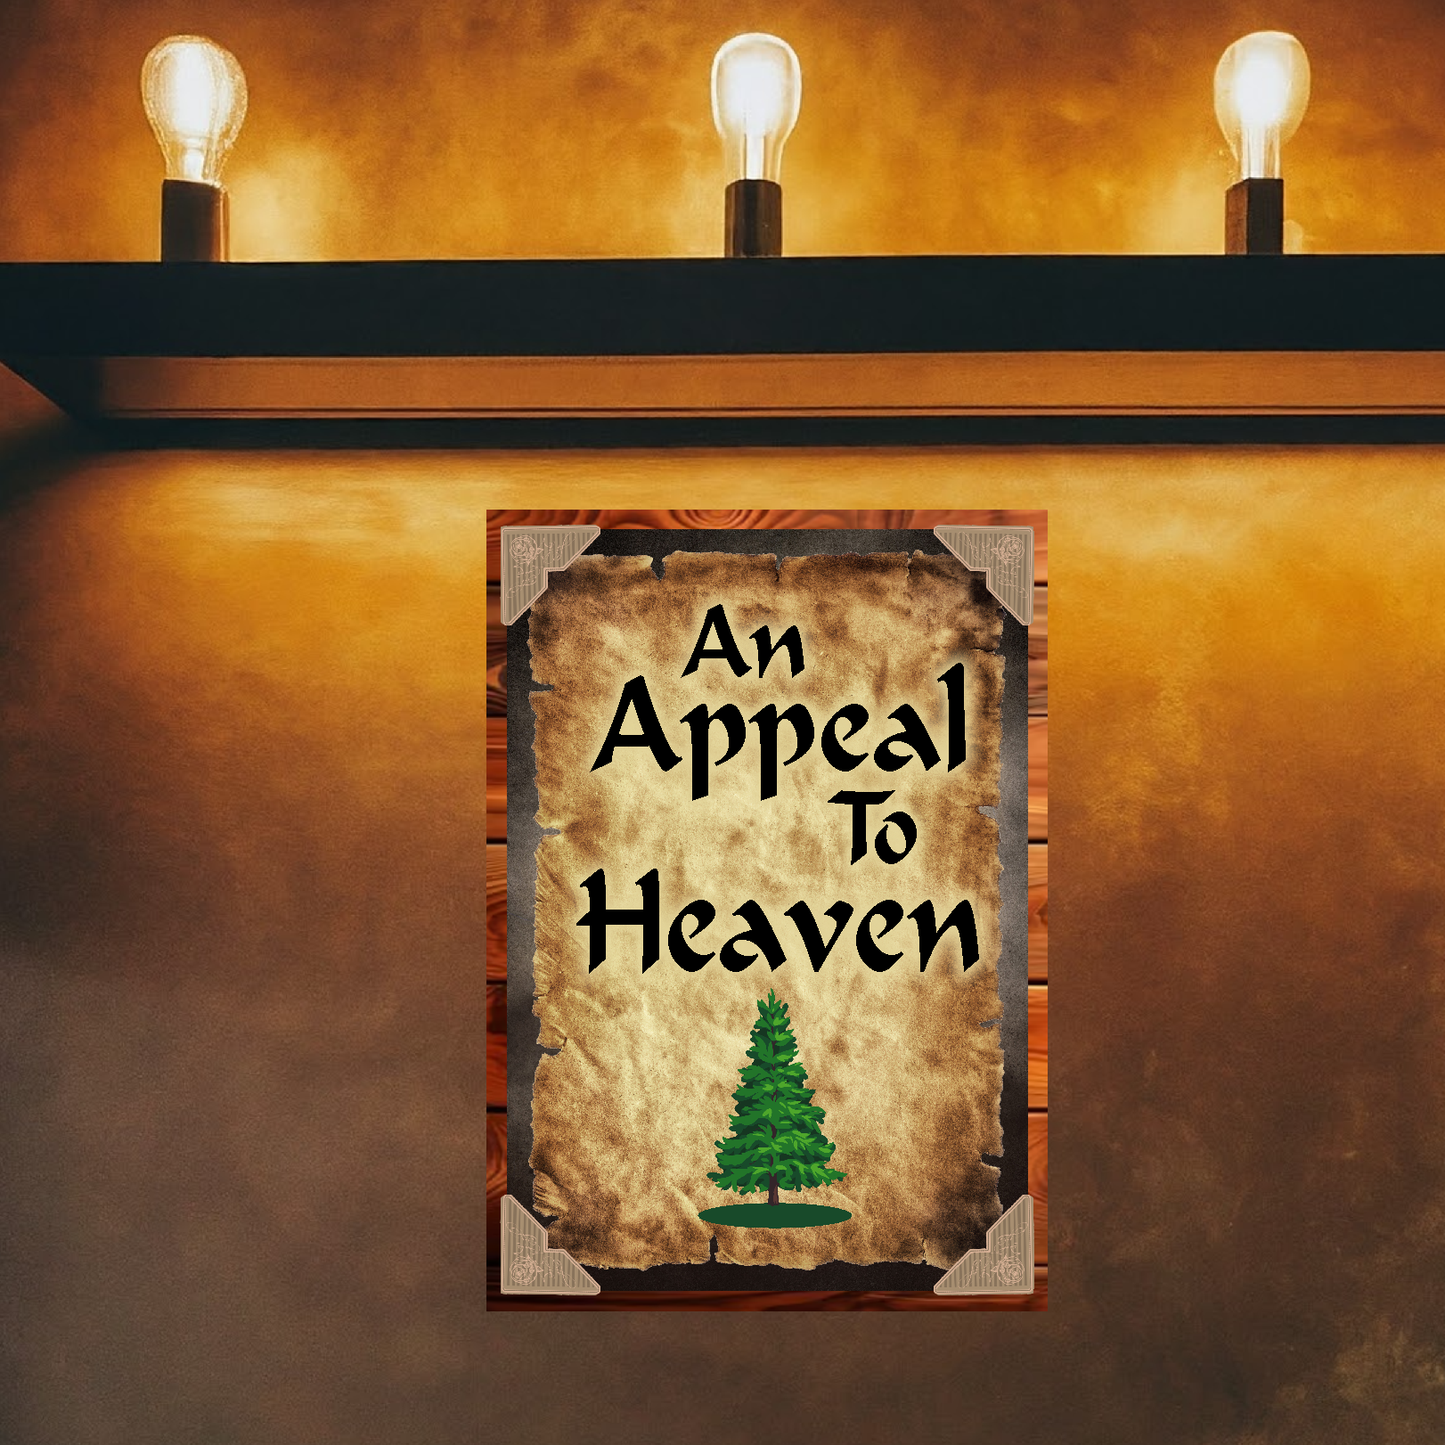 An Appeal To Heaven (Vertical) - 12" x 18" Vintage Metal Sign